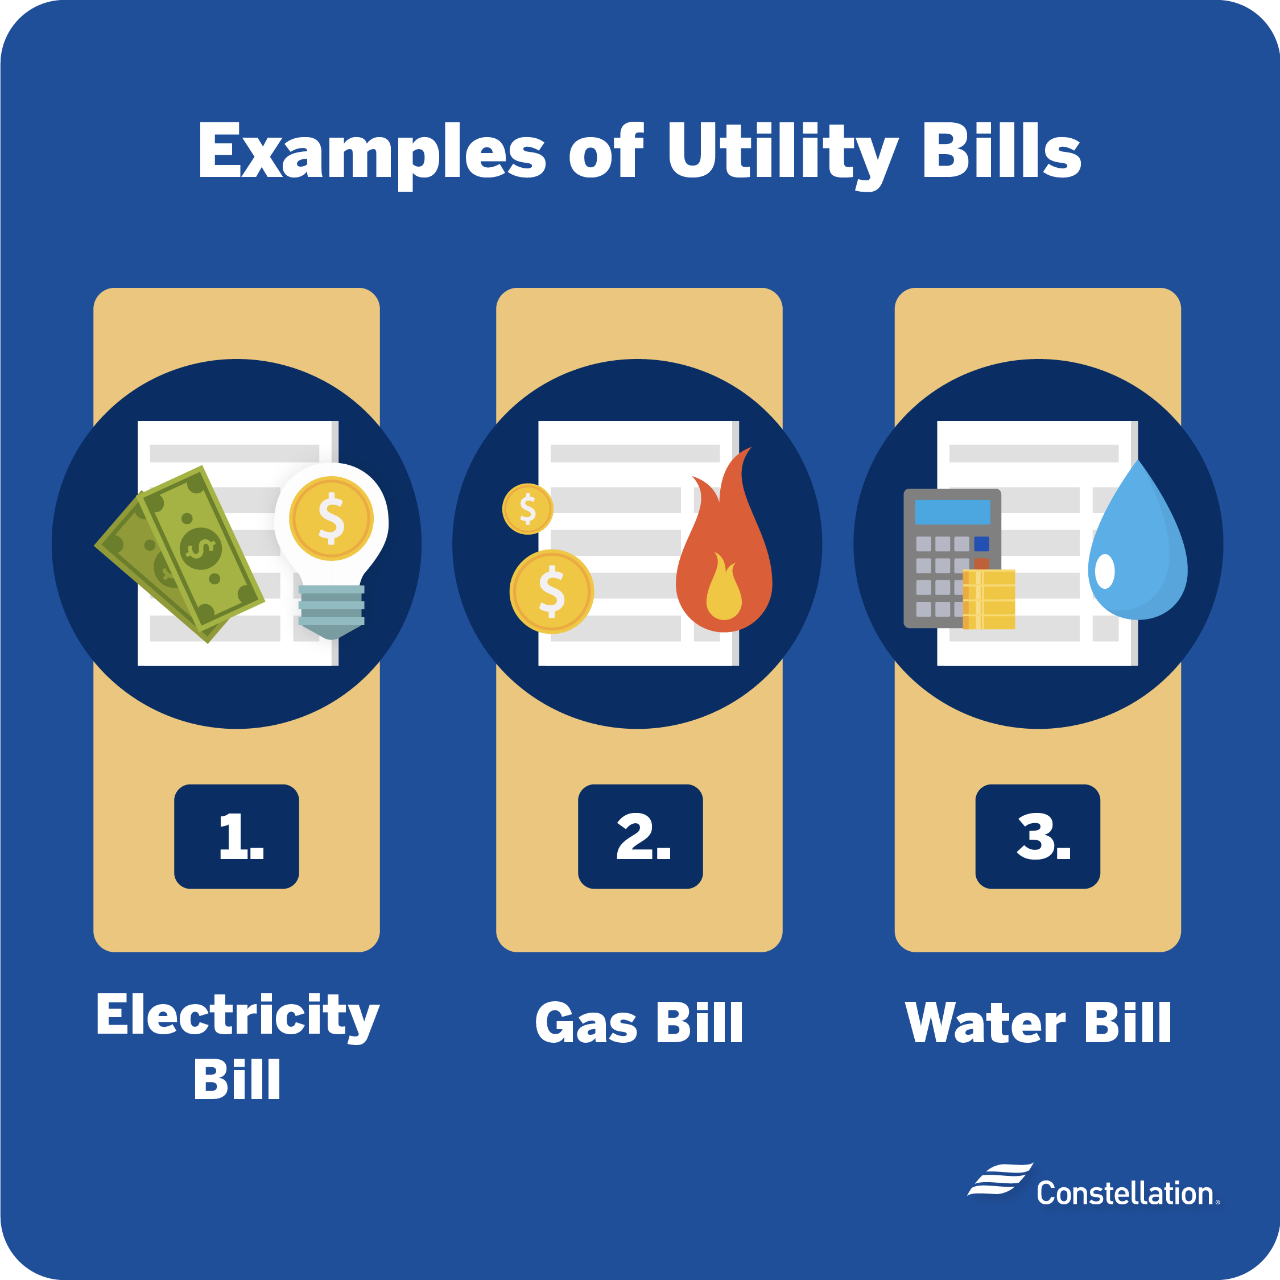 Examples of utility bills